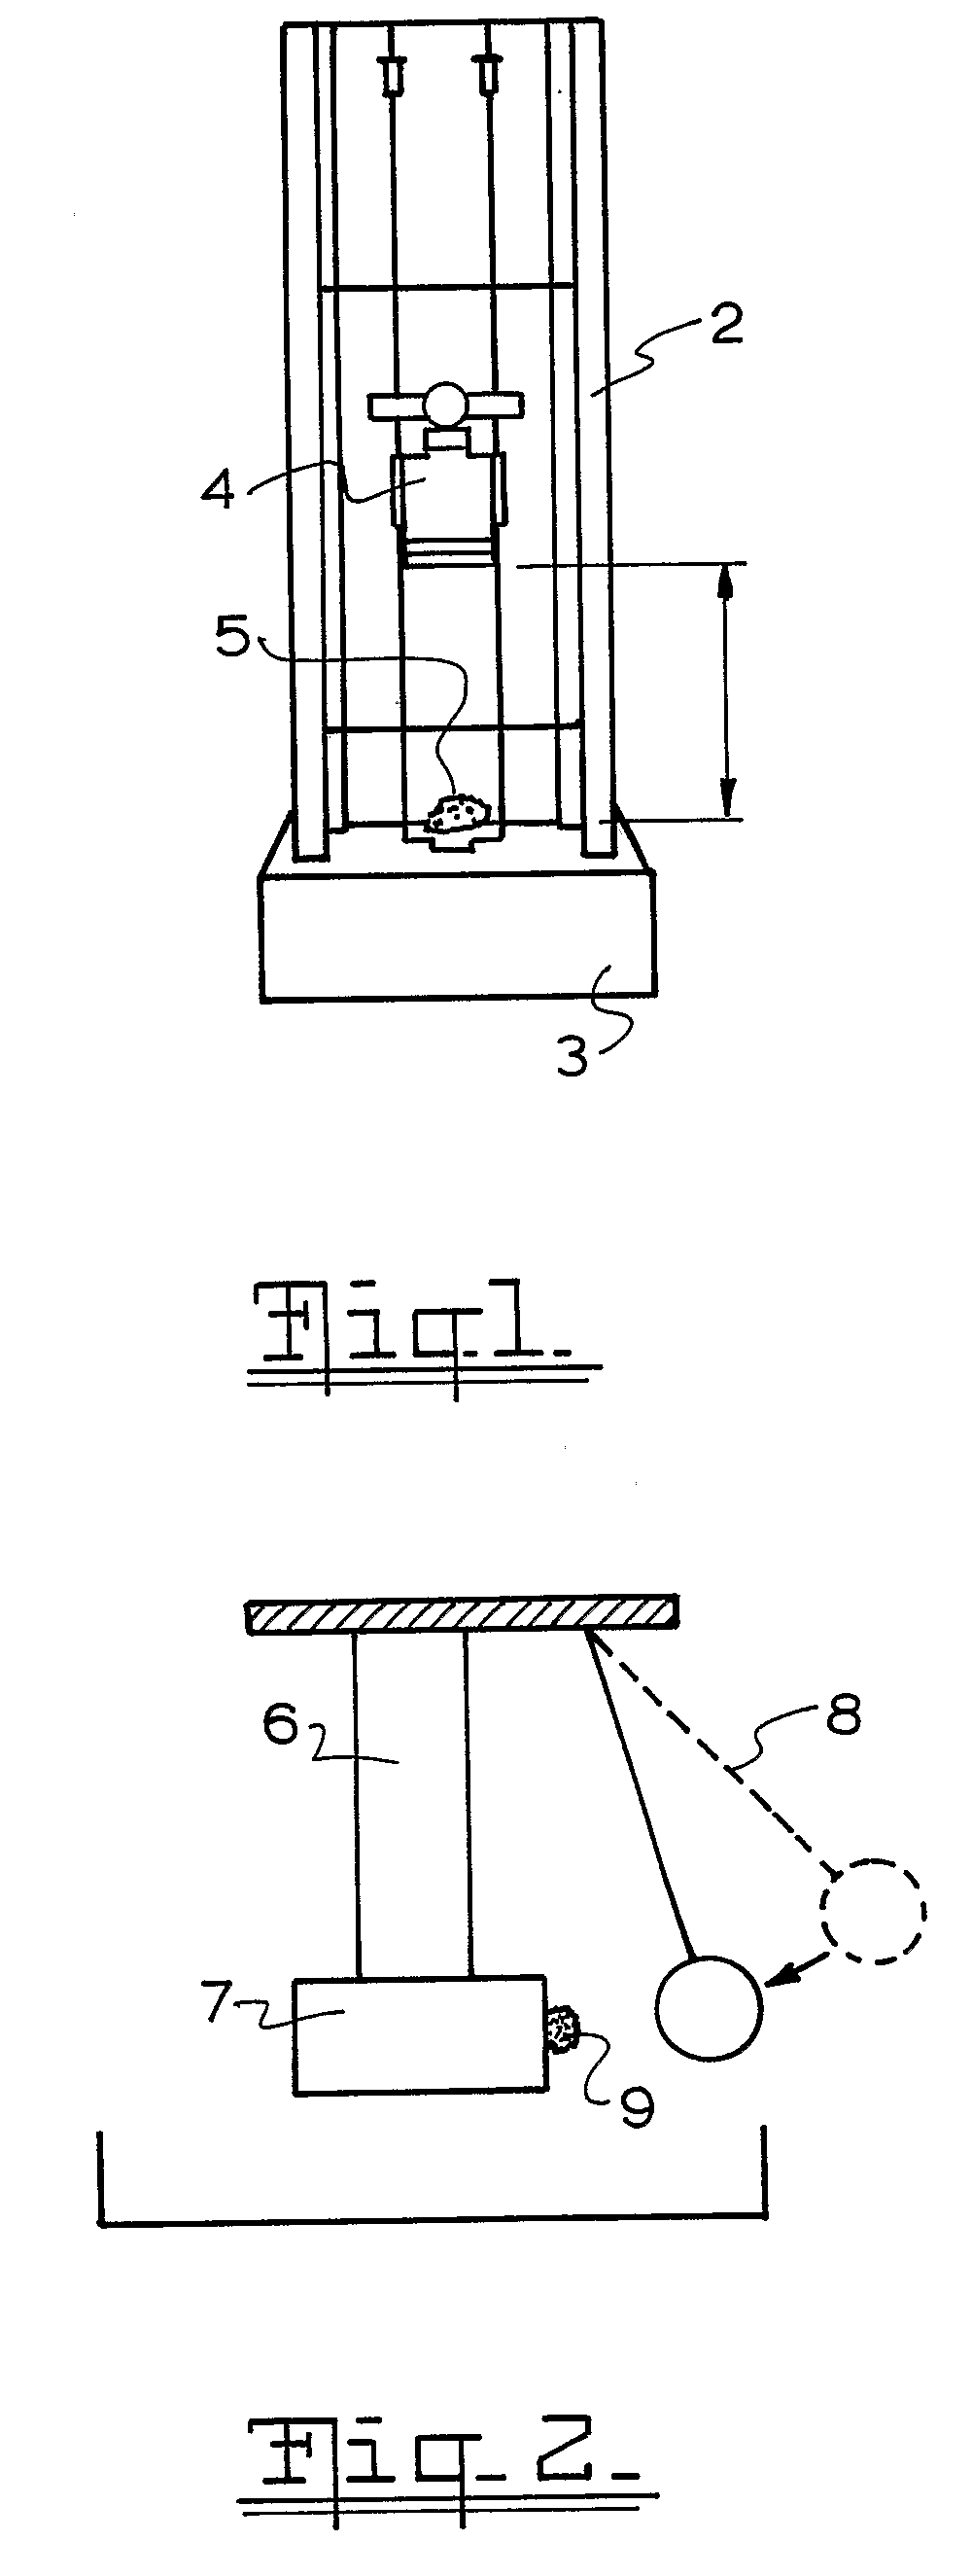 Apparatus for Determining Breakage Properties of Particulate Material